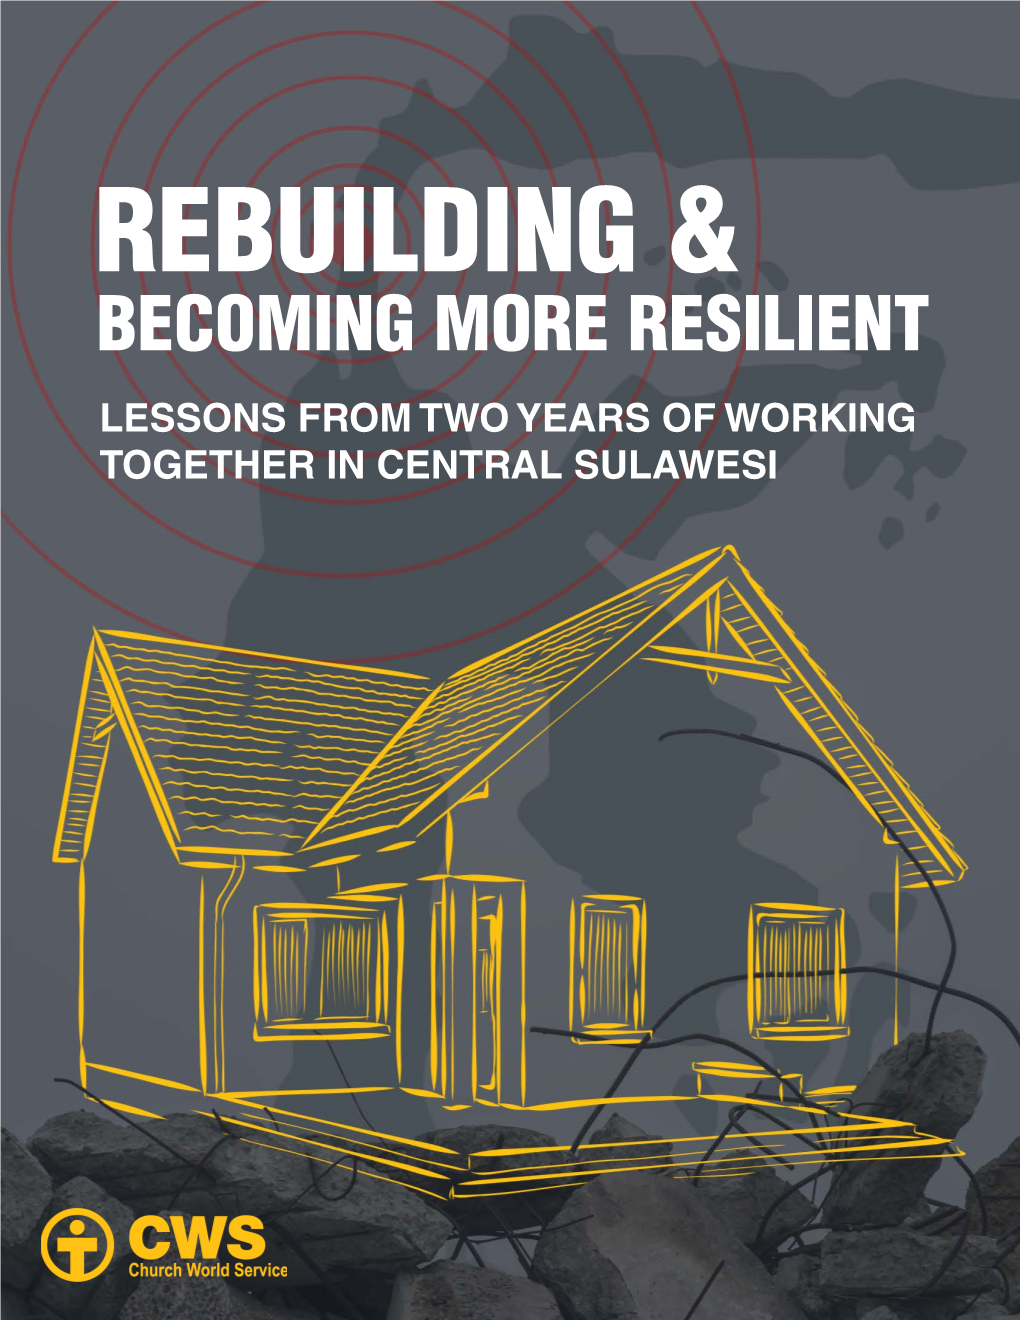 LESSONS from TWO YEARS of WORKING TOGETHER in CENTRAL SULAWESI Published By